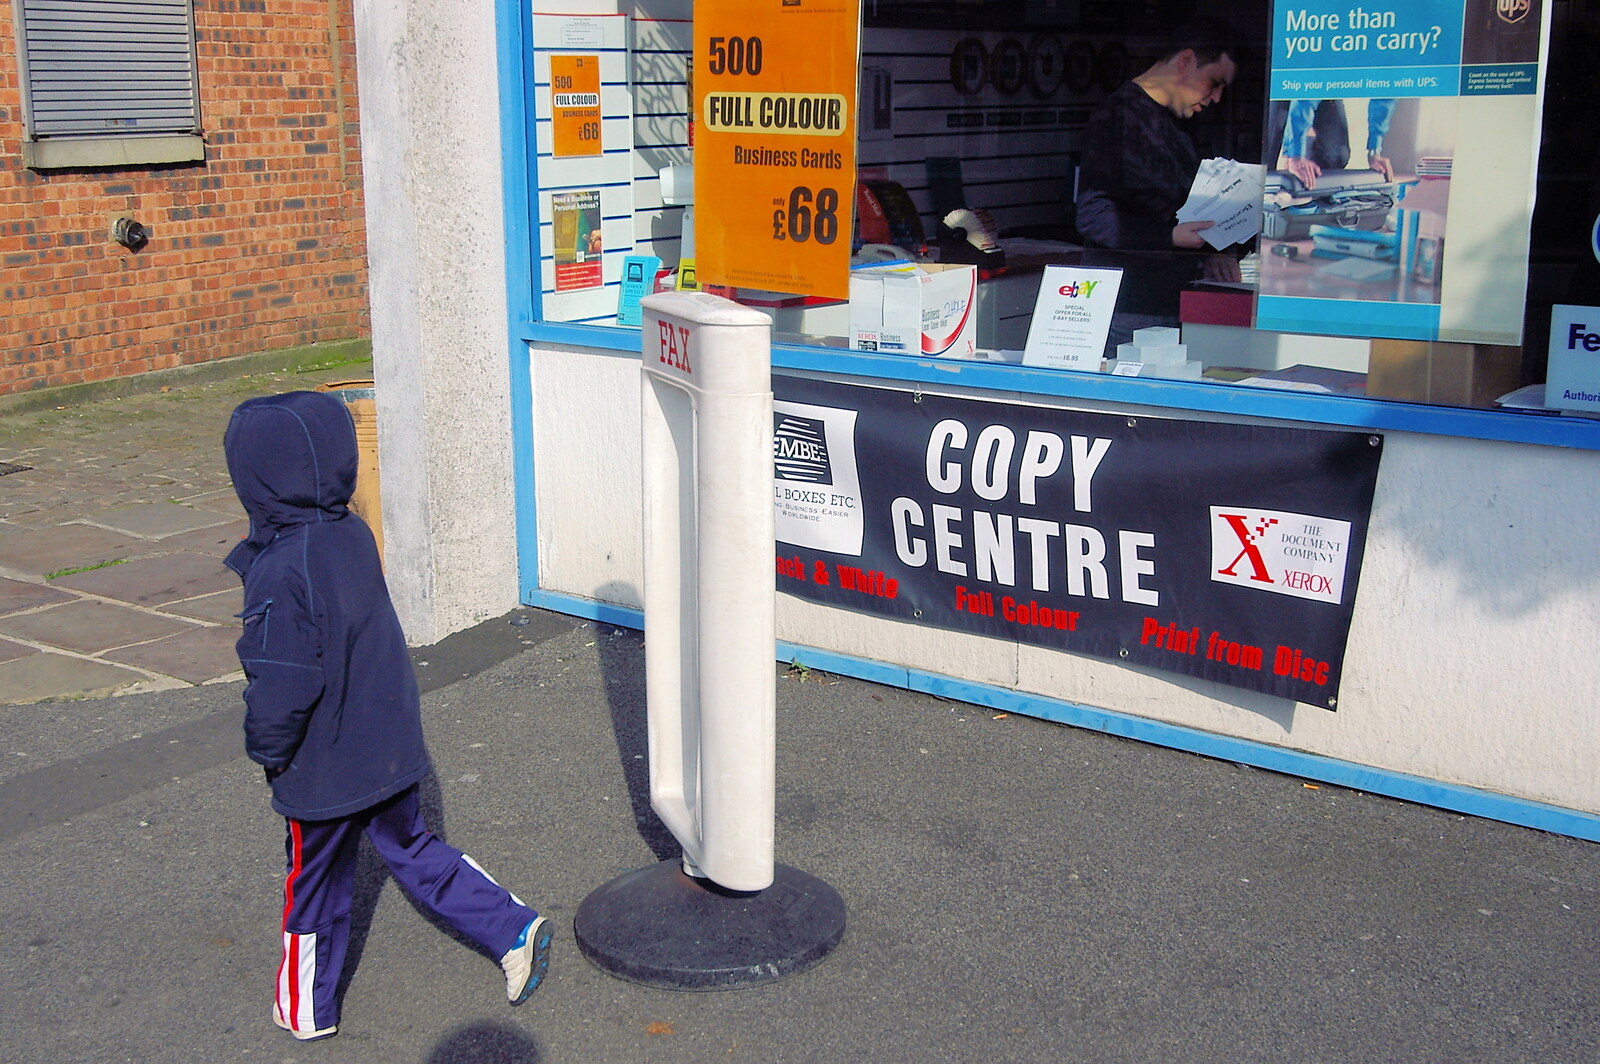 A Trip Around Macclesfield and Sandbach, Cheshire - 10th September 2005: A kid spins a sign around